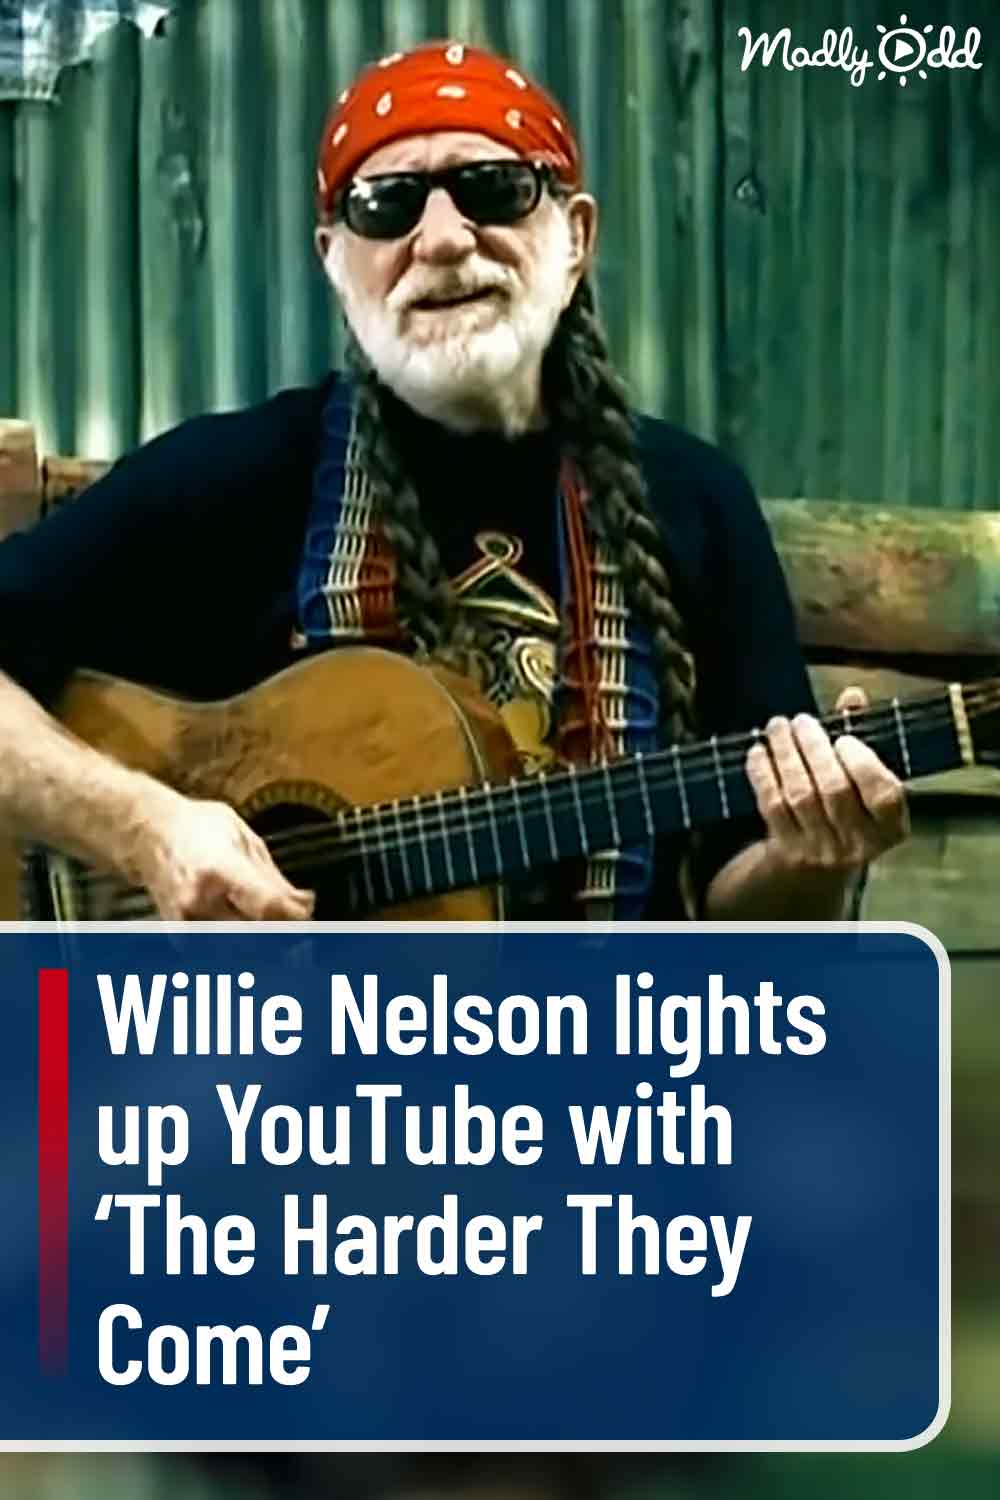 Willie Nelson lights up YouTube with ‘The Harder They Come’